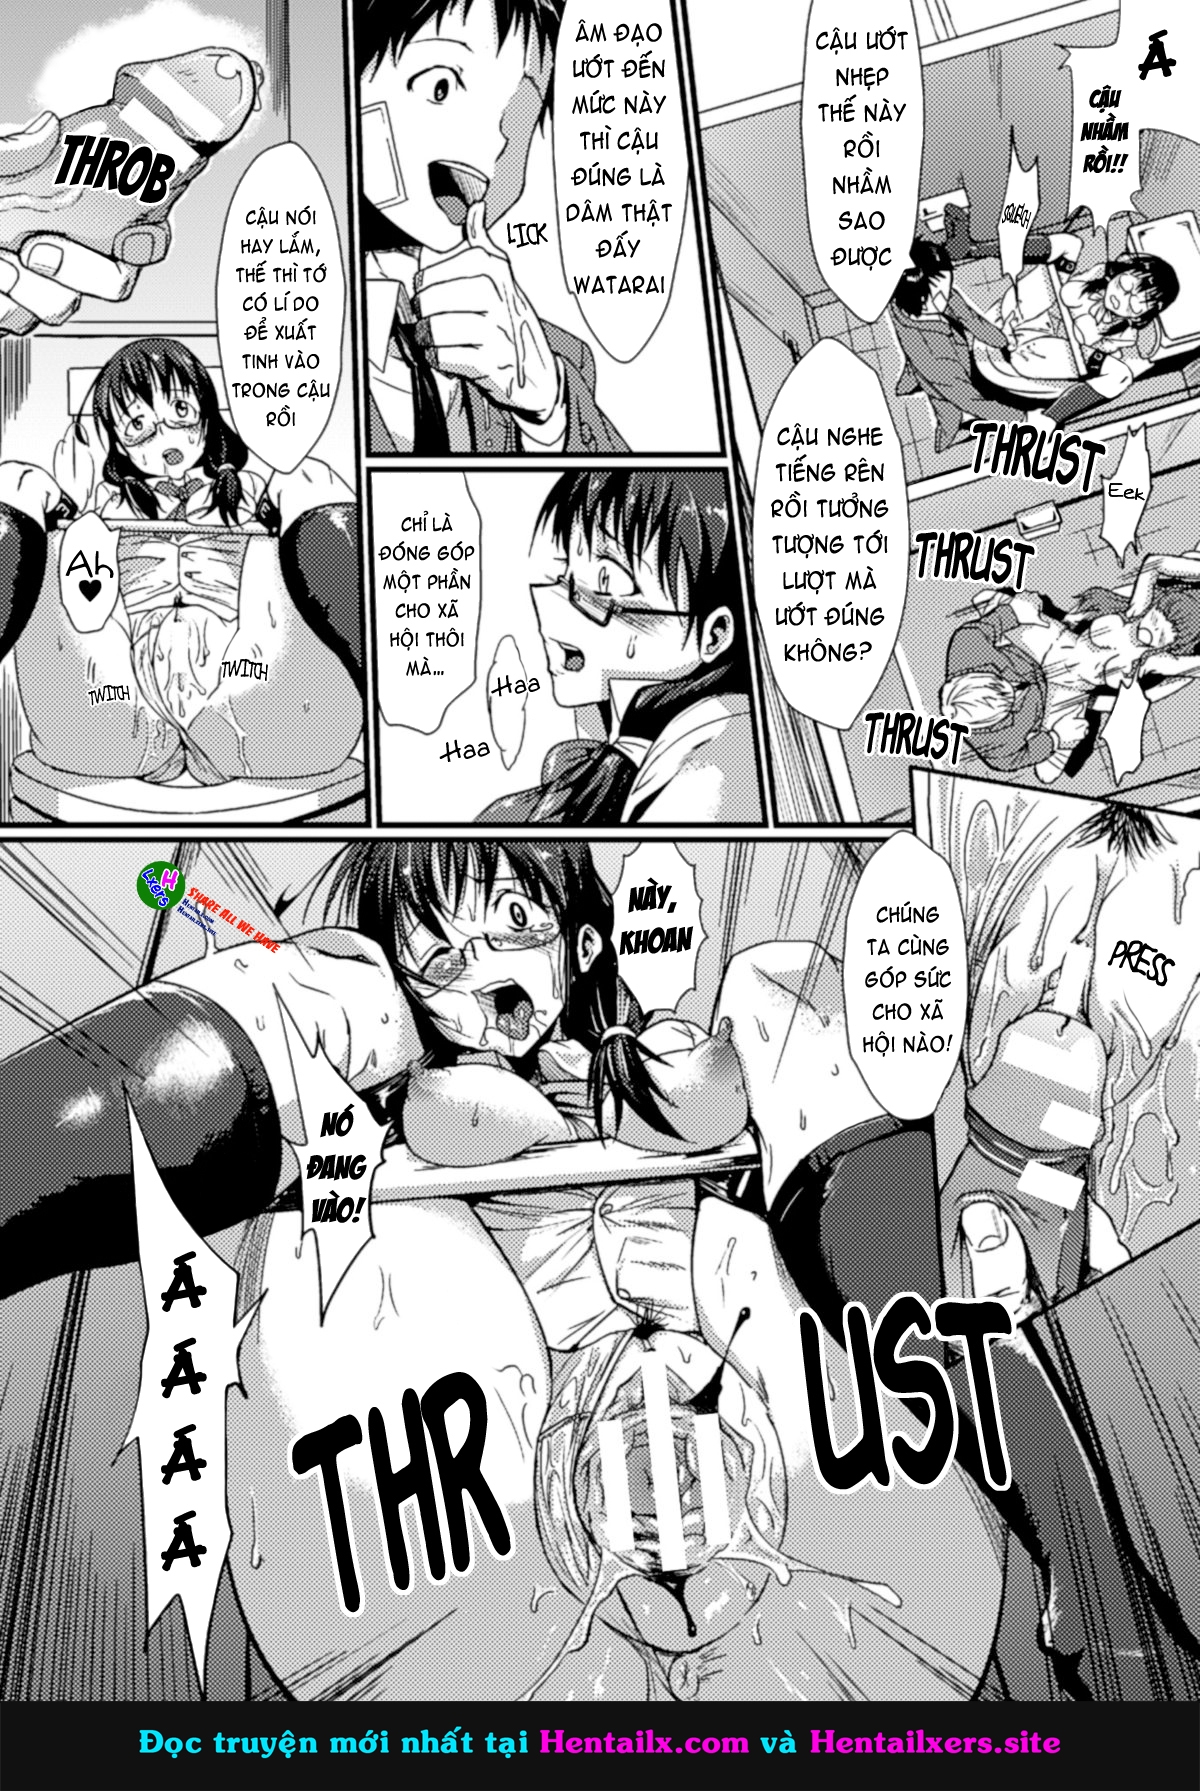 Xem ảnh Drop Out - Chapter 9 END - 1606921449790_0 - Hentai24h.Tv